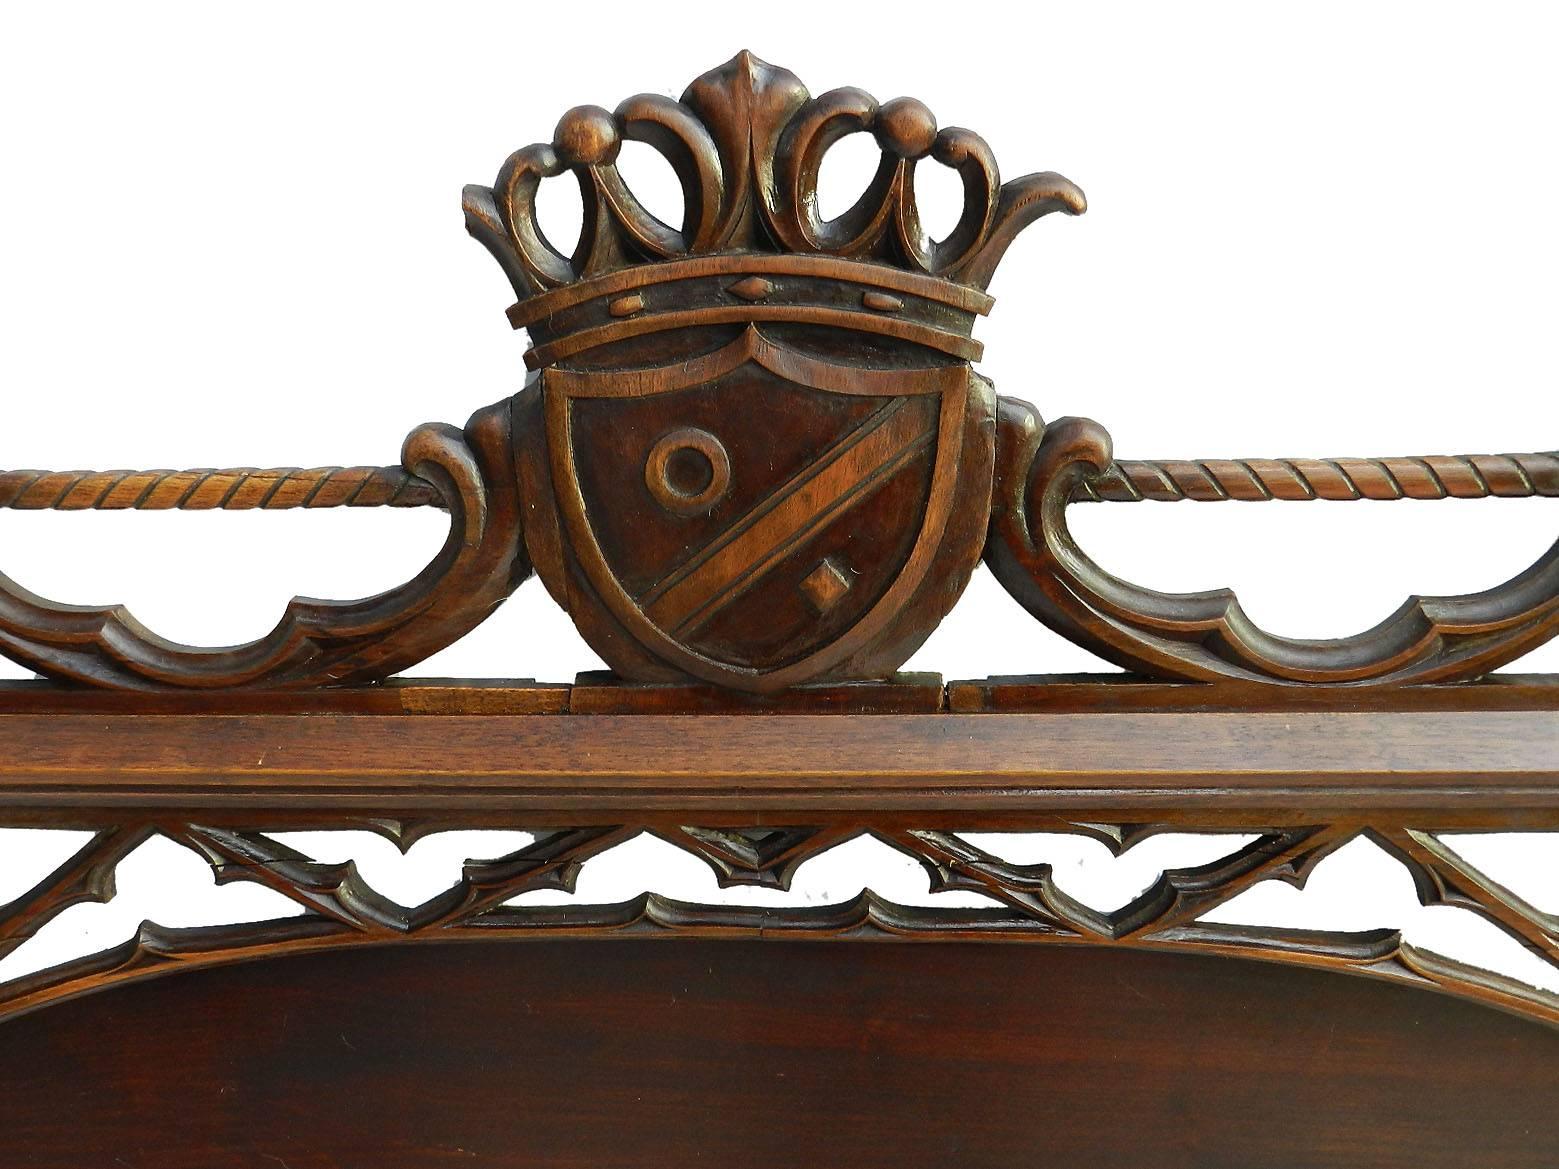 French Bed Headboard 19th century Gothic revival 
Heraldic carved wood c1880
Loads of Harry Potter charm and character 
Very adaptable can be raised higher or lower as required
Could also be upholstered if required
Good antique condition with only a